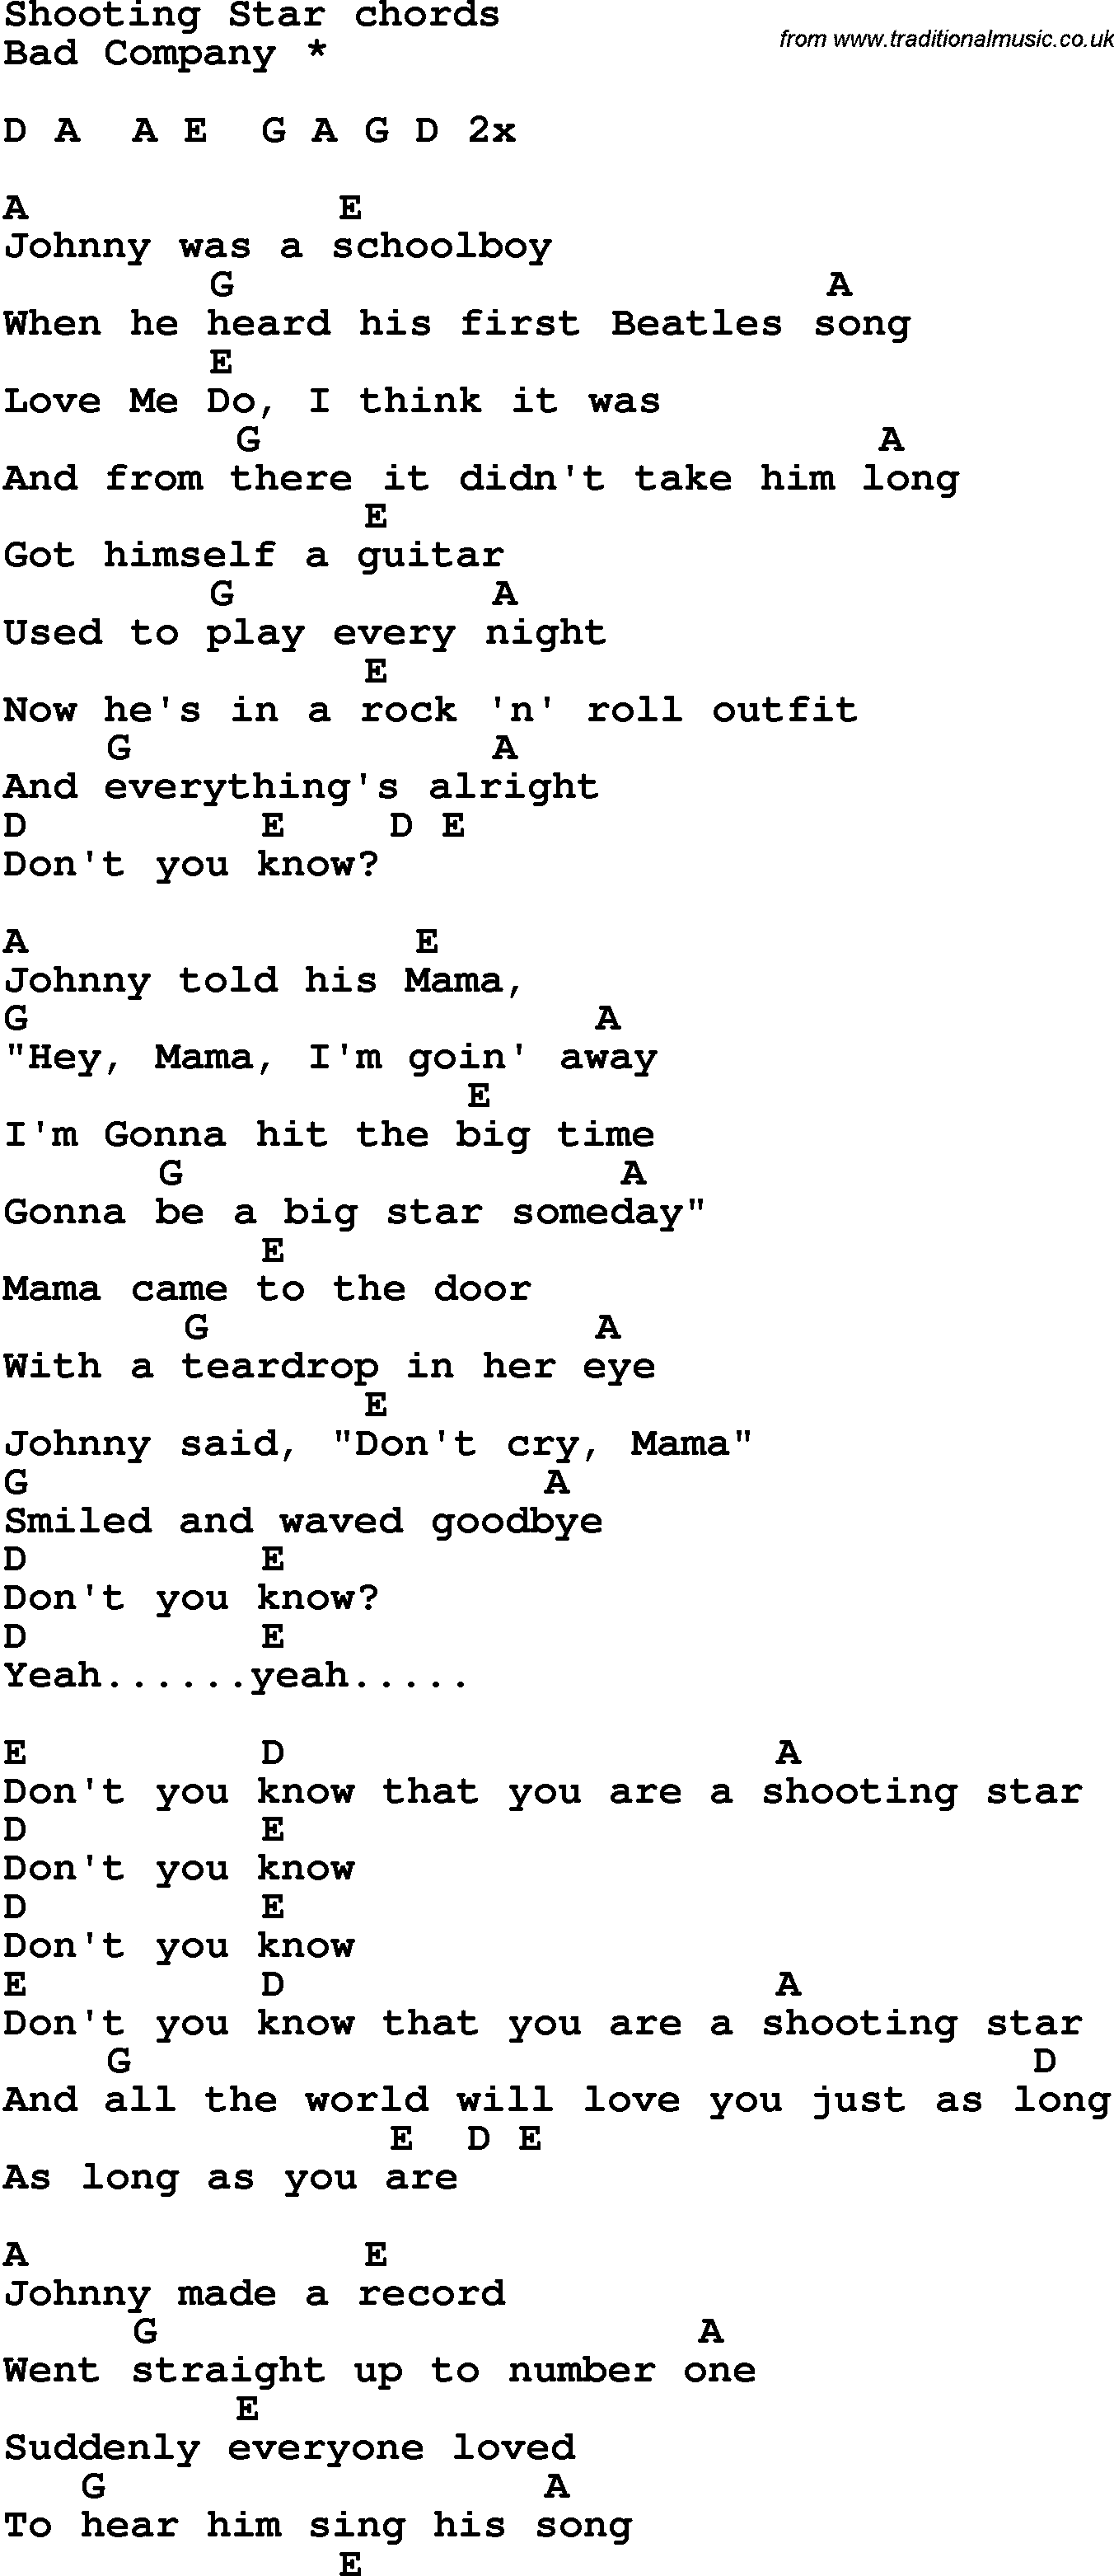 Song Lyrics with guitar chords for Shooting Star